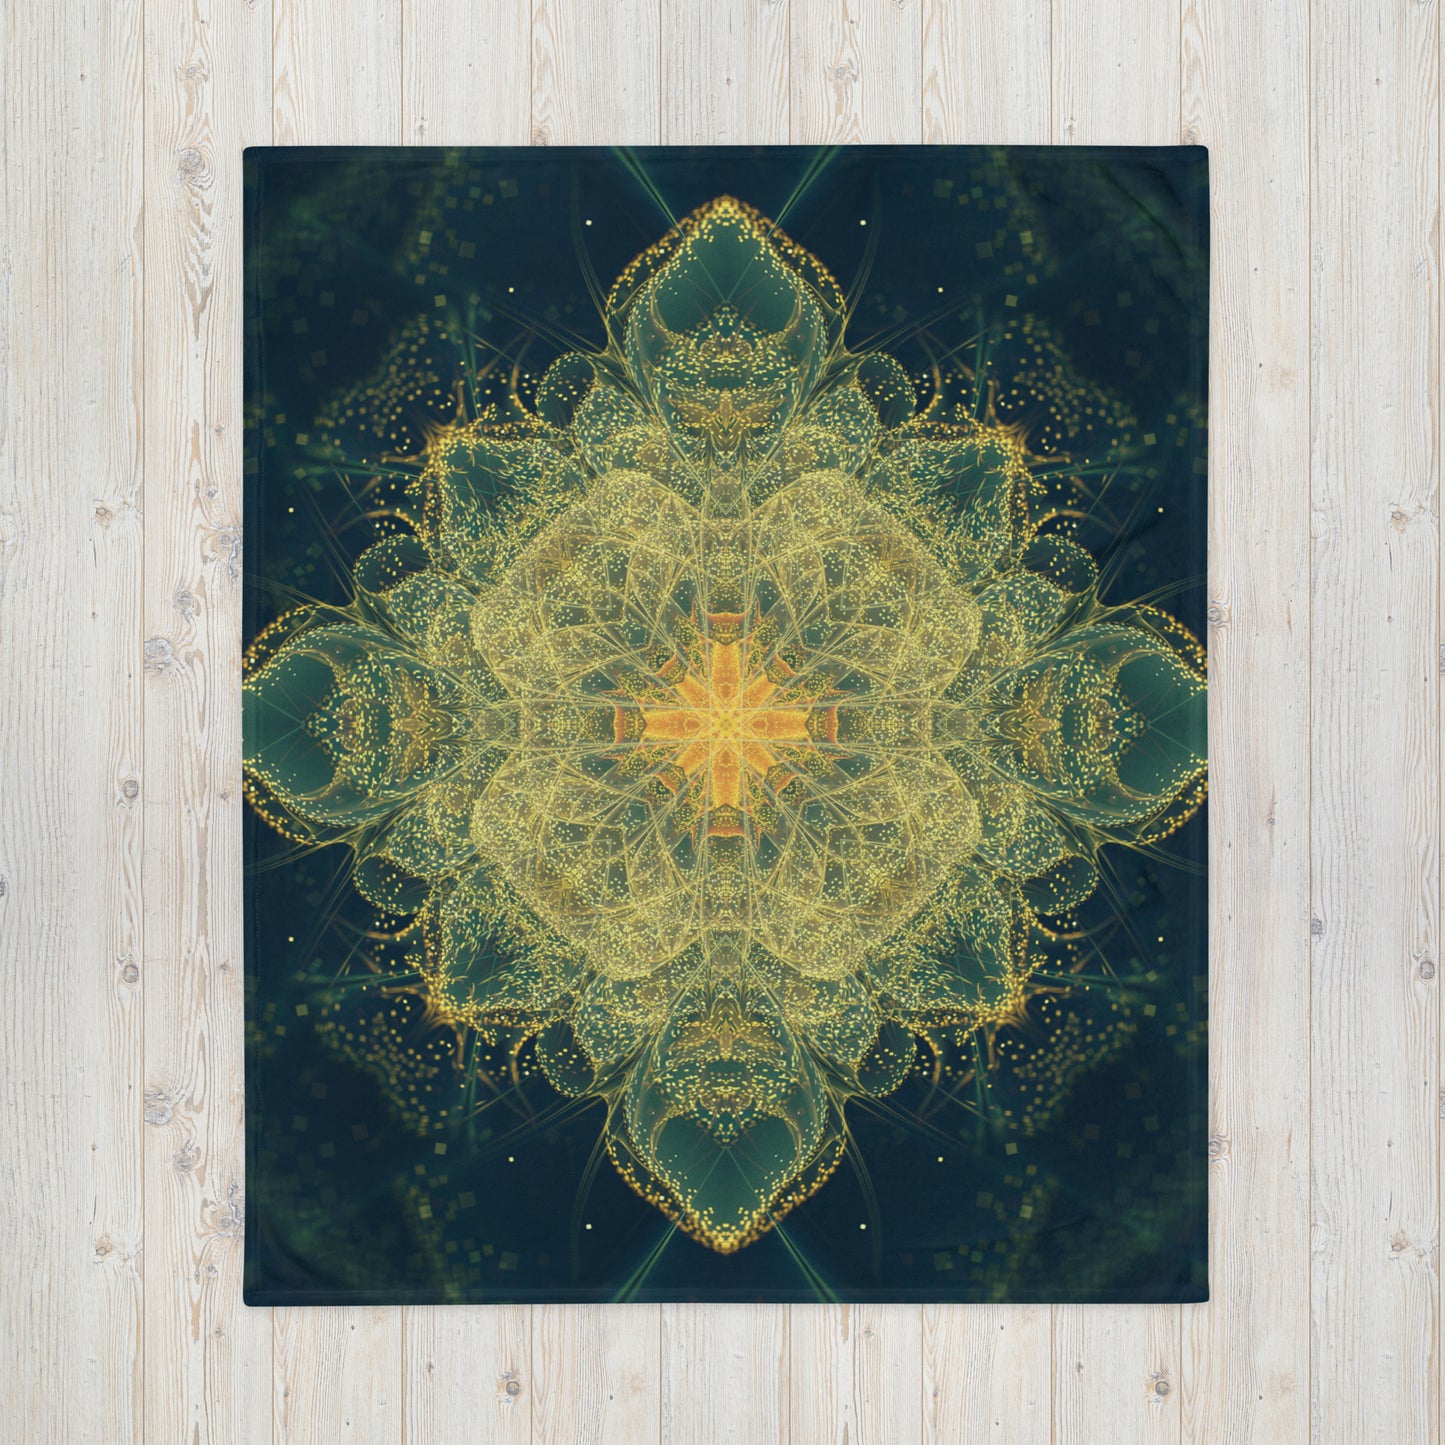 "Happy Thoughts" - Fractal Mandal THROW BLANKET